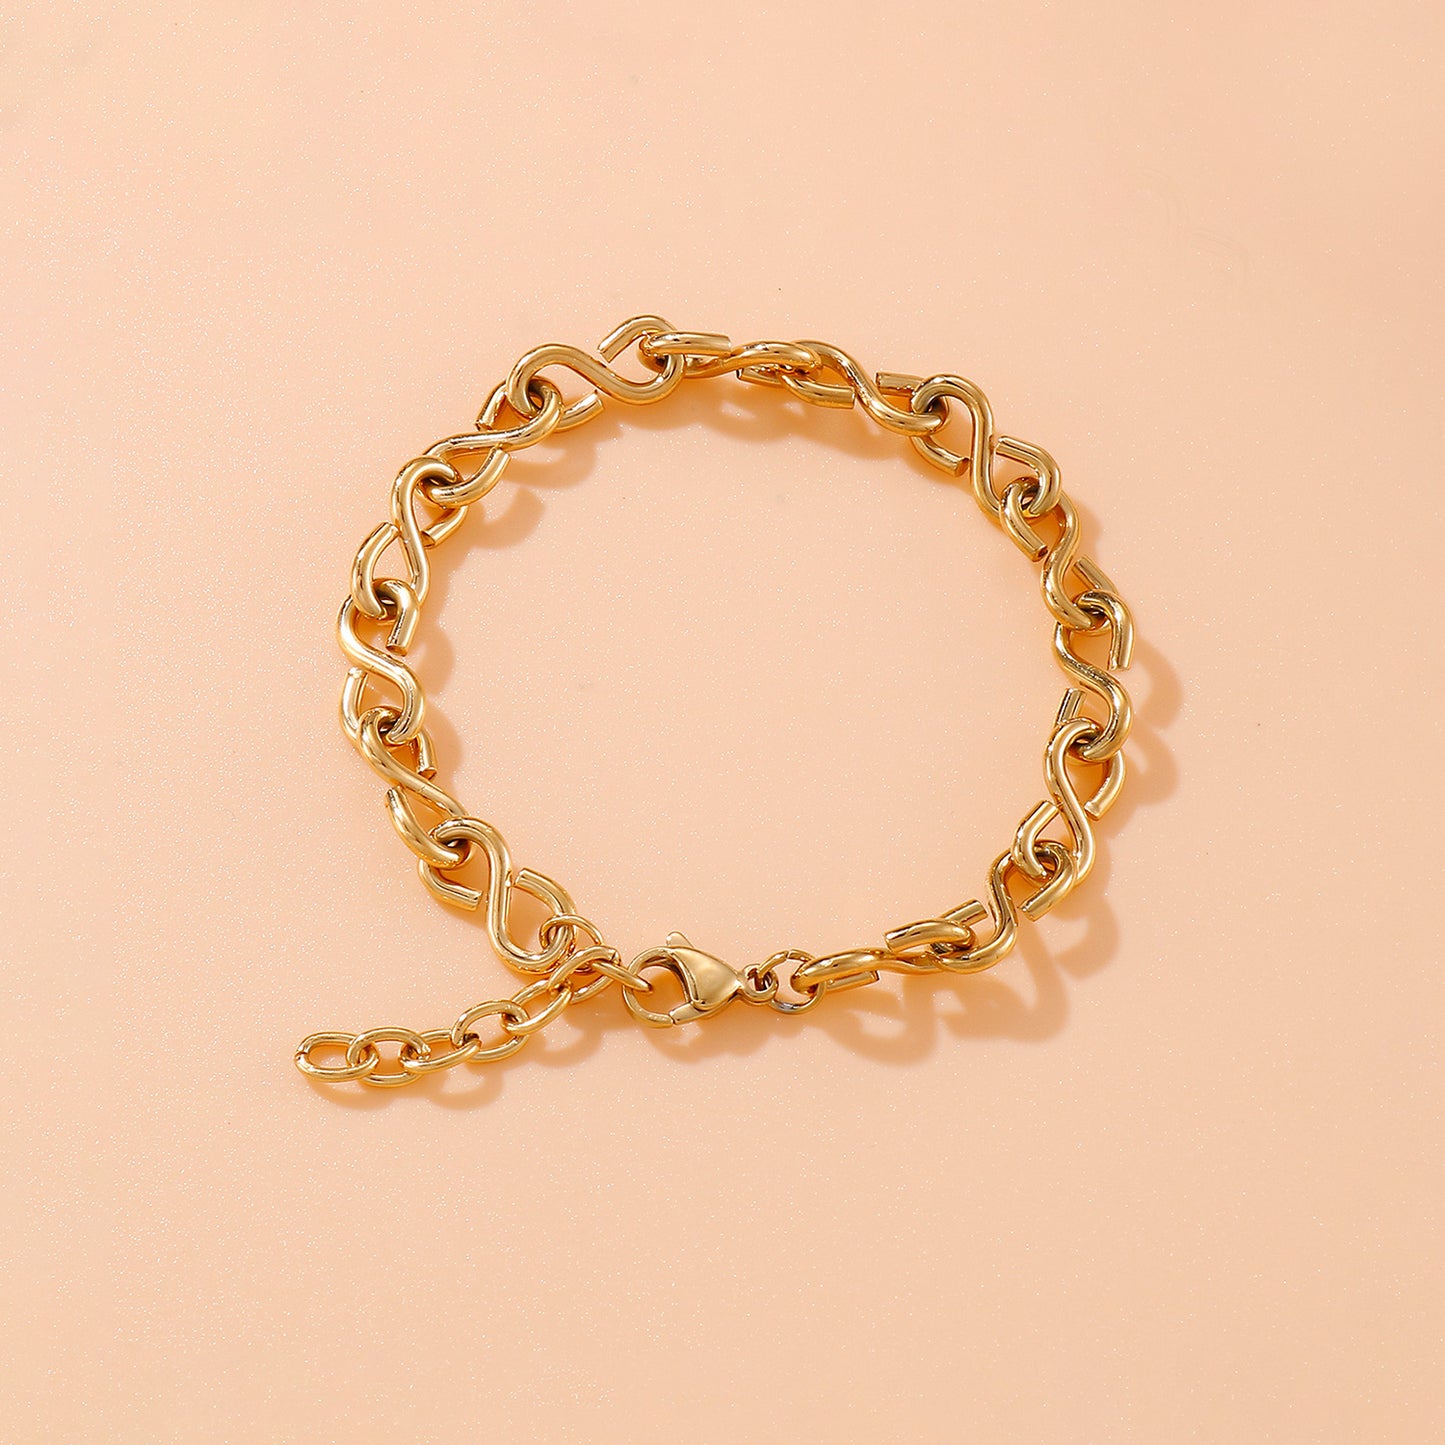 Stainless Steel Figure 8 Chain Link Bracelet Gold One Size